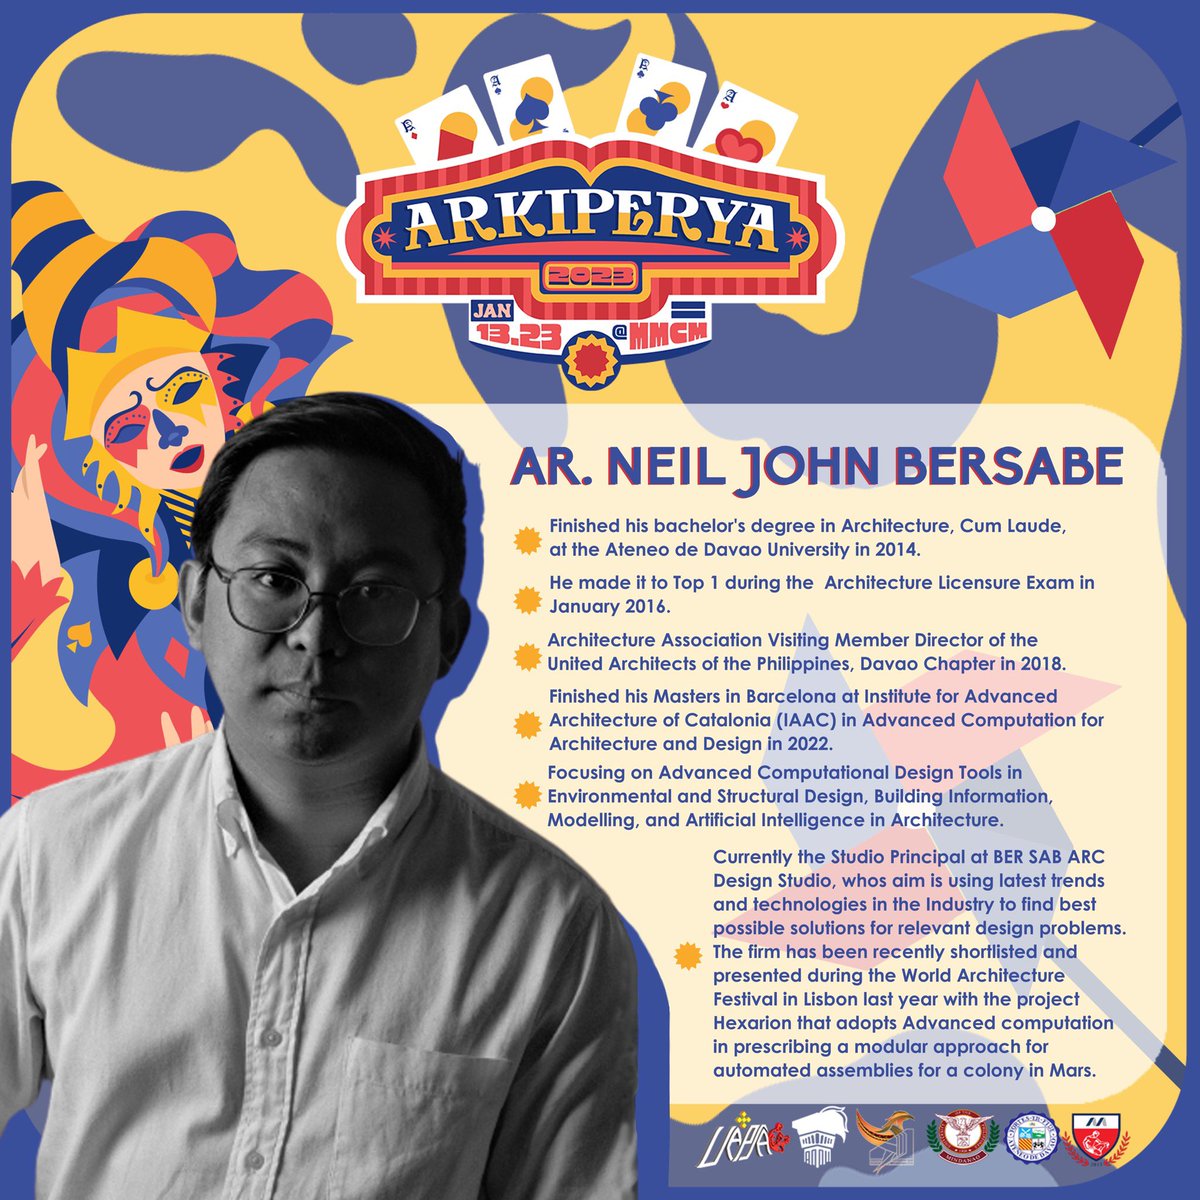 Who else can lead us best if not those whose foundations in the Architecture Community are already built with experiences and challenges? 

Let us hear from our very own speaker, AR. NEIL JOHN BERSABE.  The fun of getting to relate to the experiences awaits! 

#ArkiPerya
#NAW2022